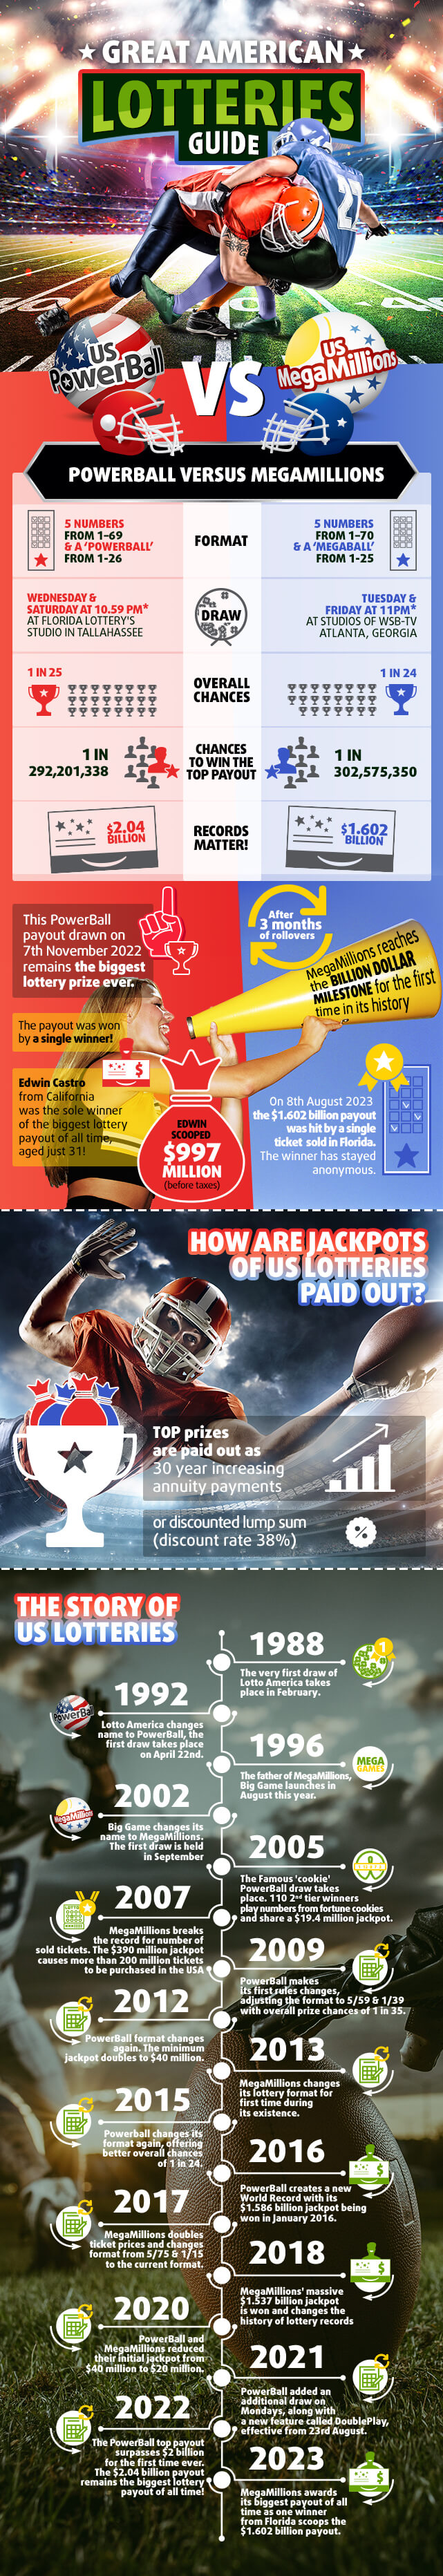 An infographic comparing US PowerBall vs MegaMillions